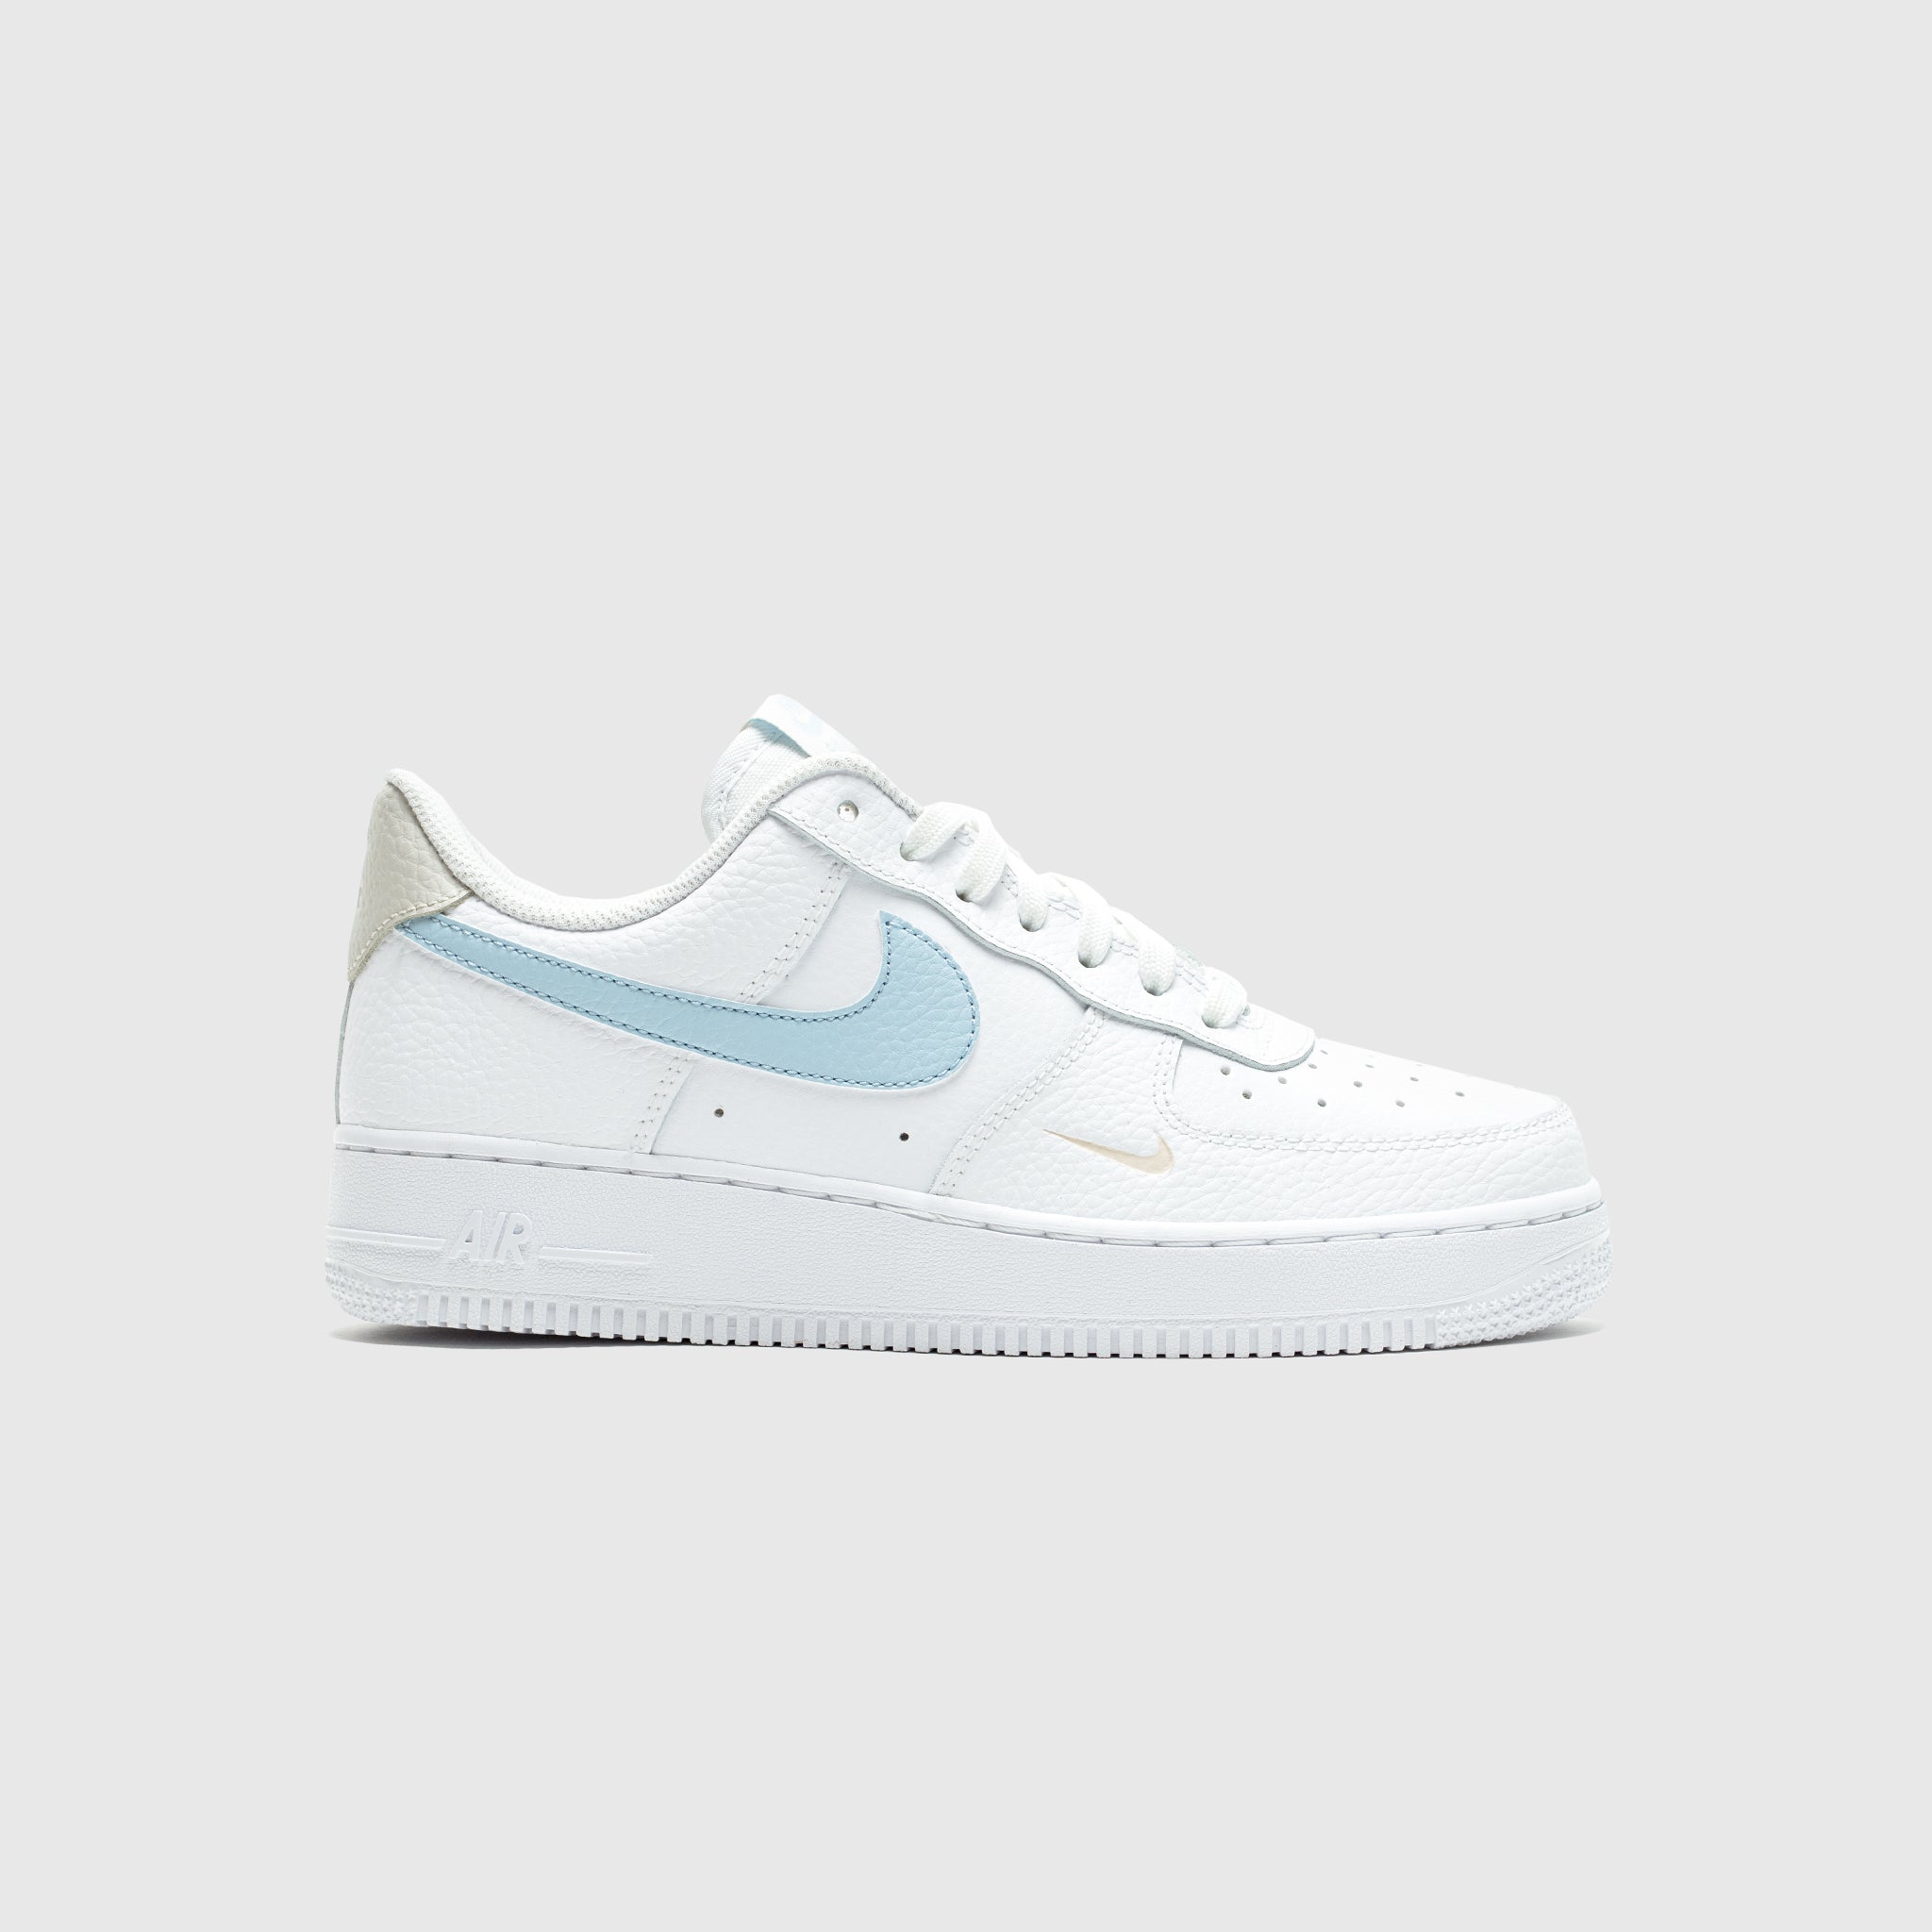 WMNS Purple AIR FORCE 1 '07 "ARMORY BLUE"